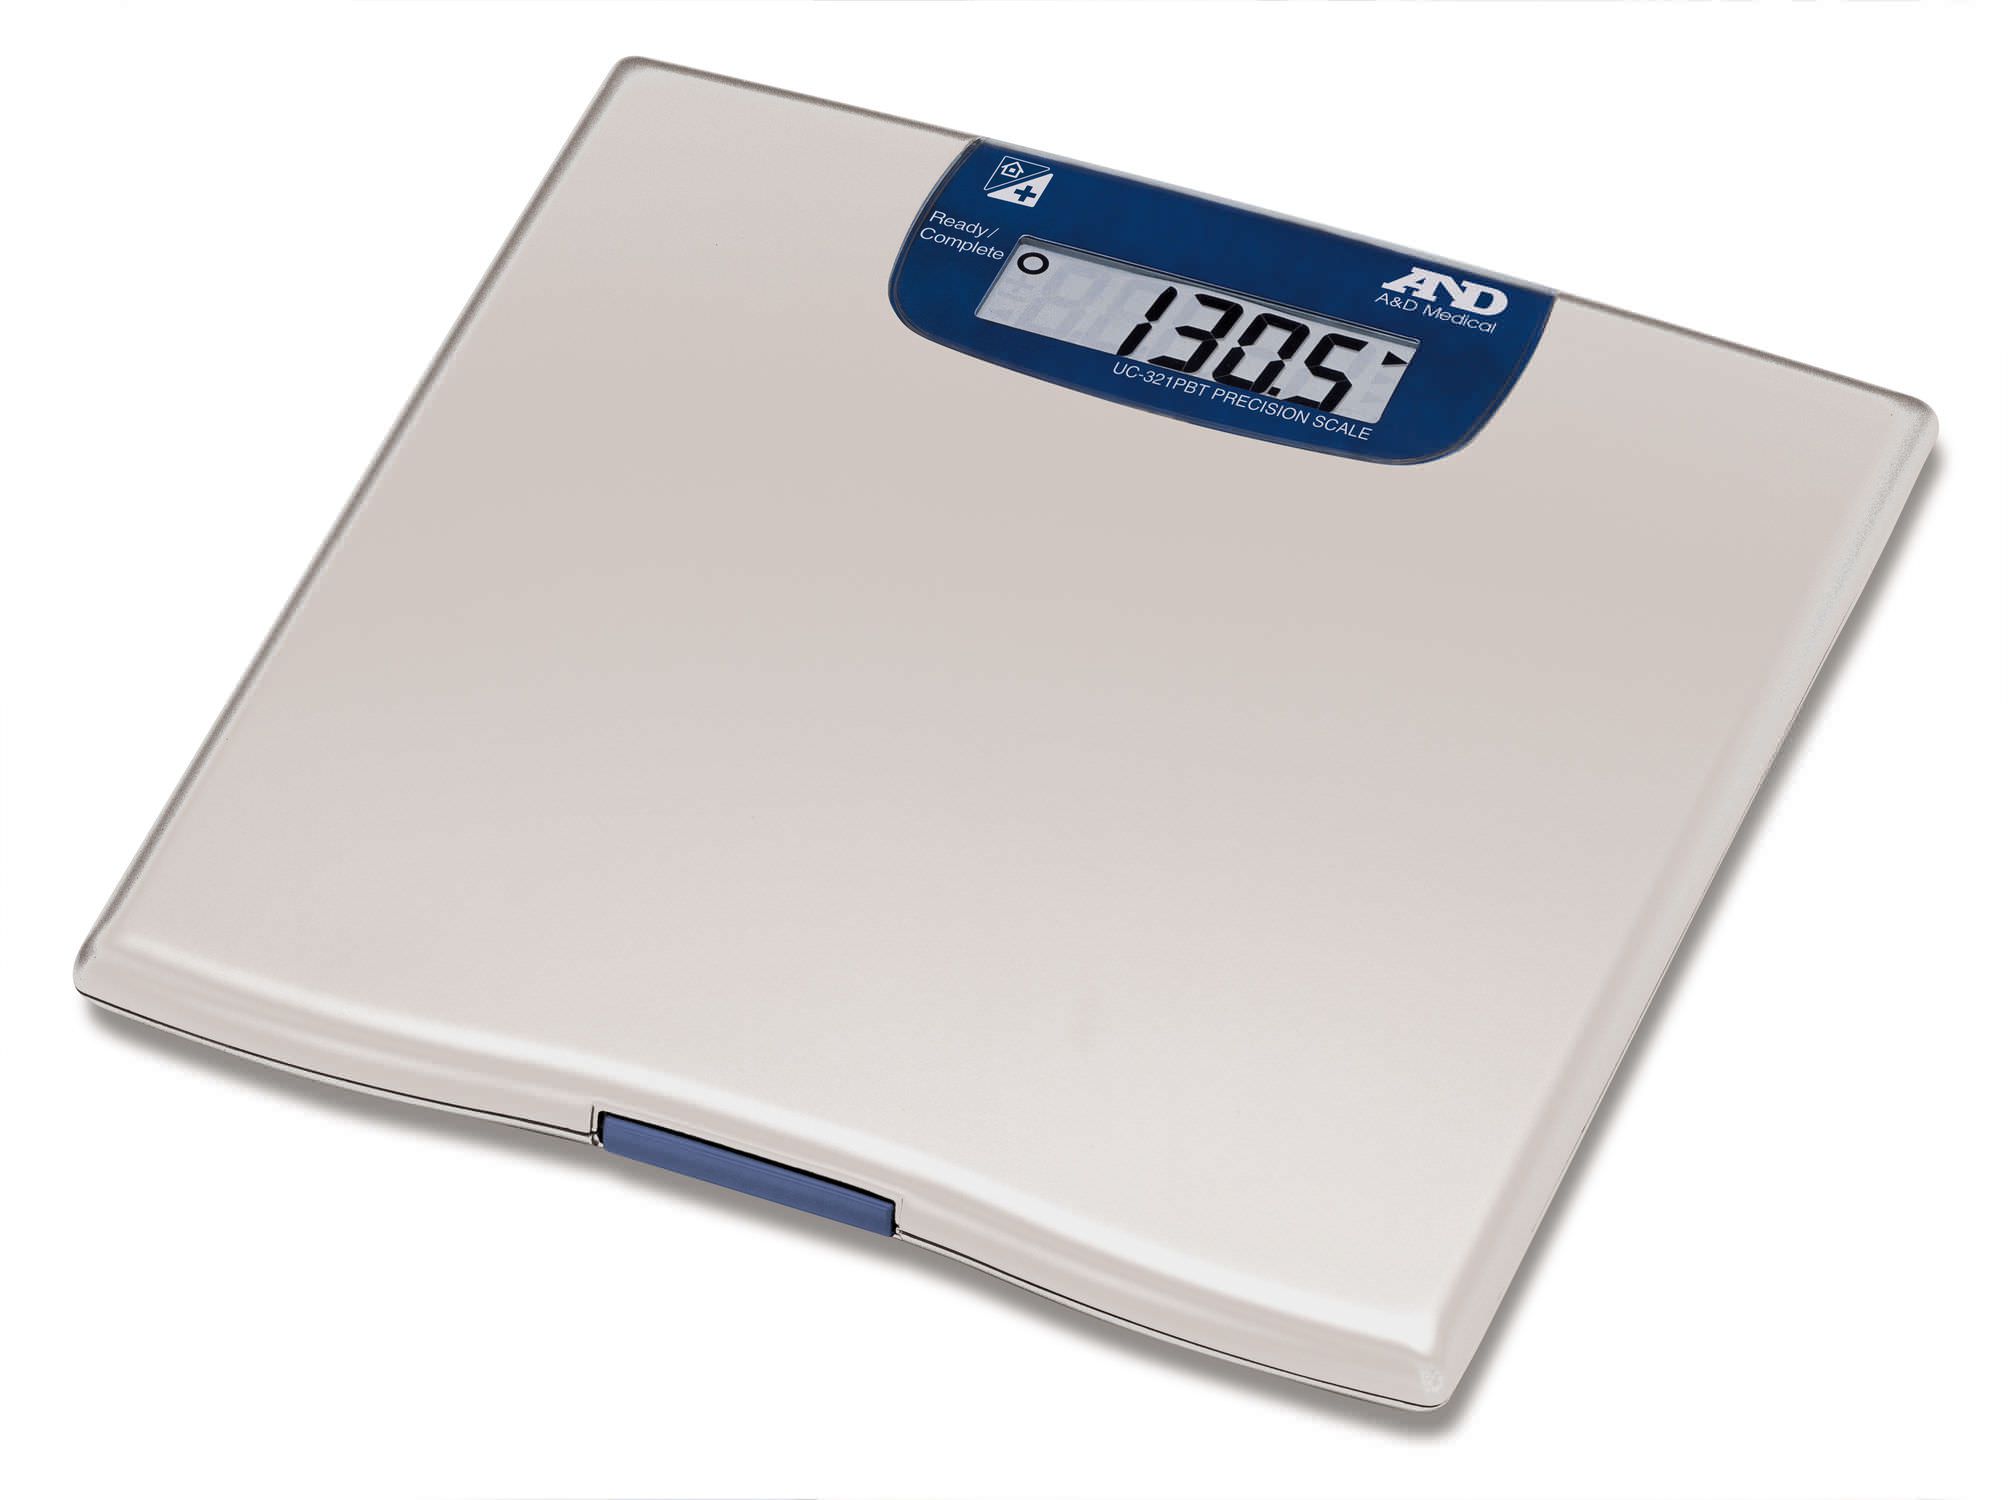 Electronic patient weighing scale / wireless 200 Kg | UC-321PBT A&D Company, Limited